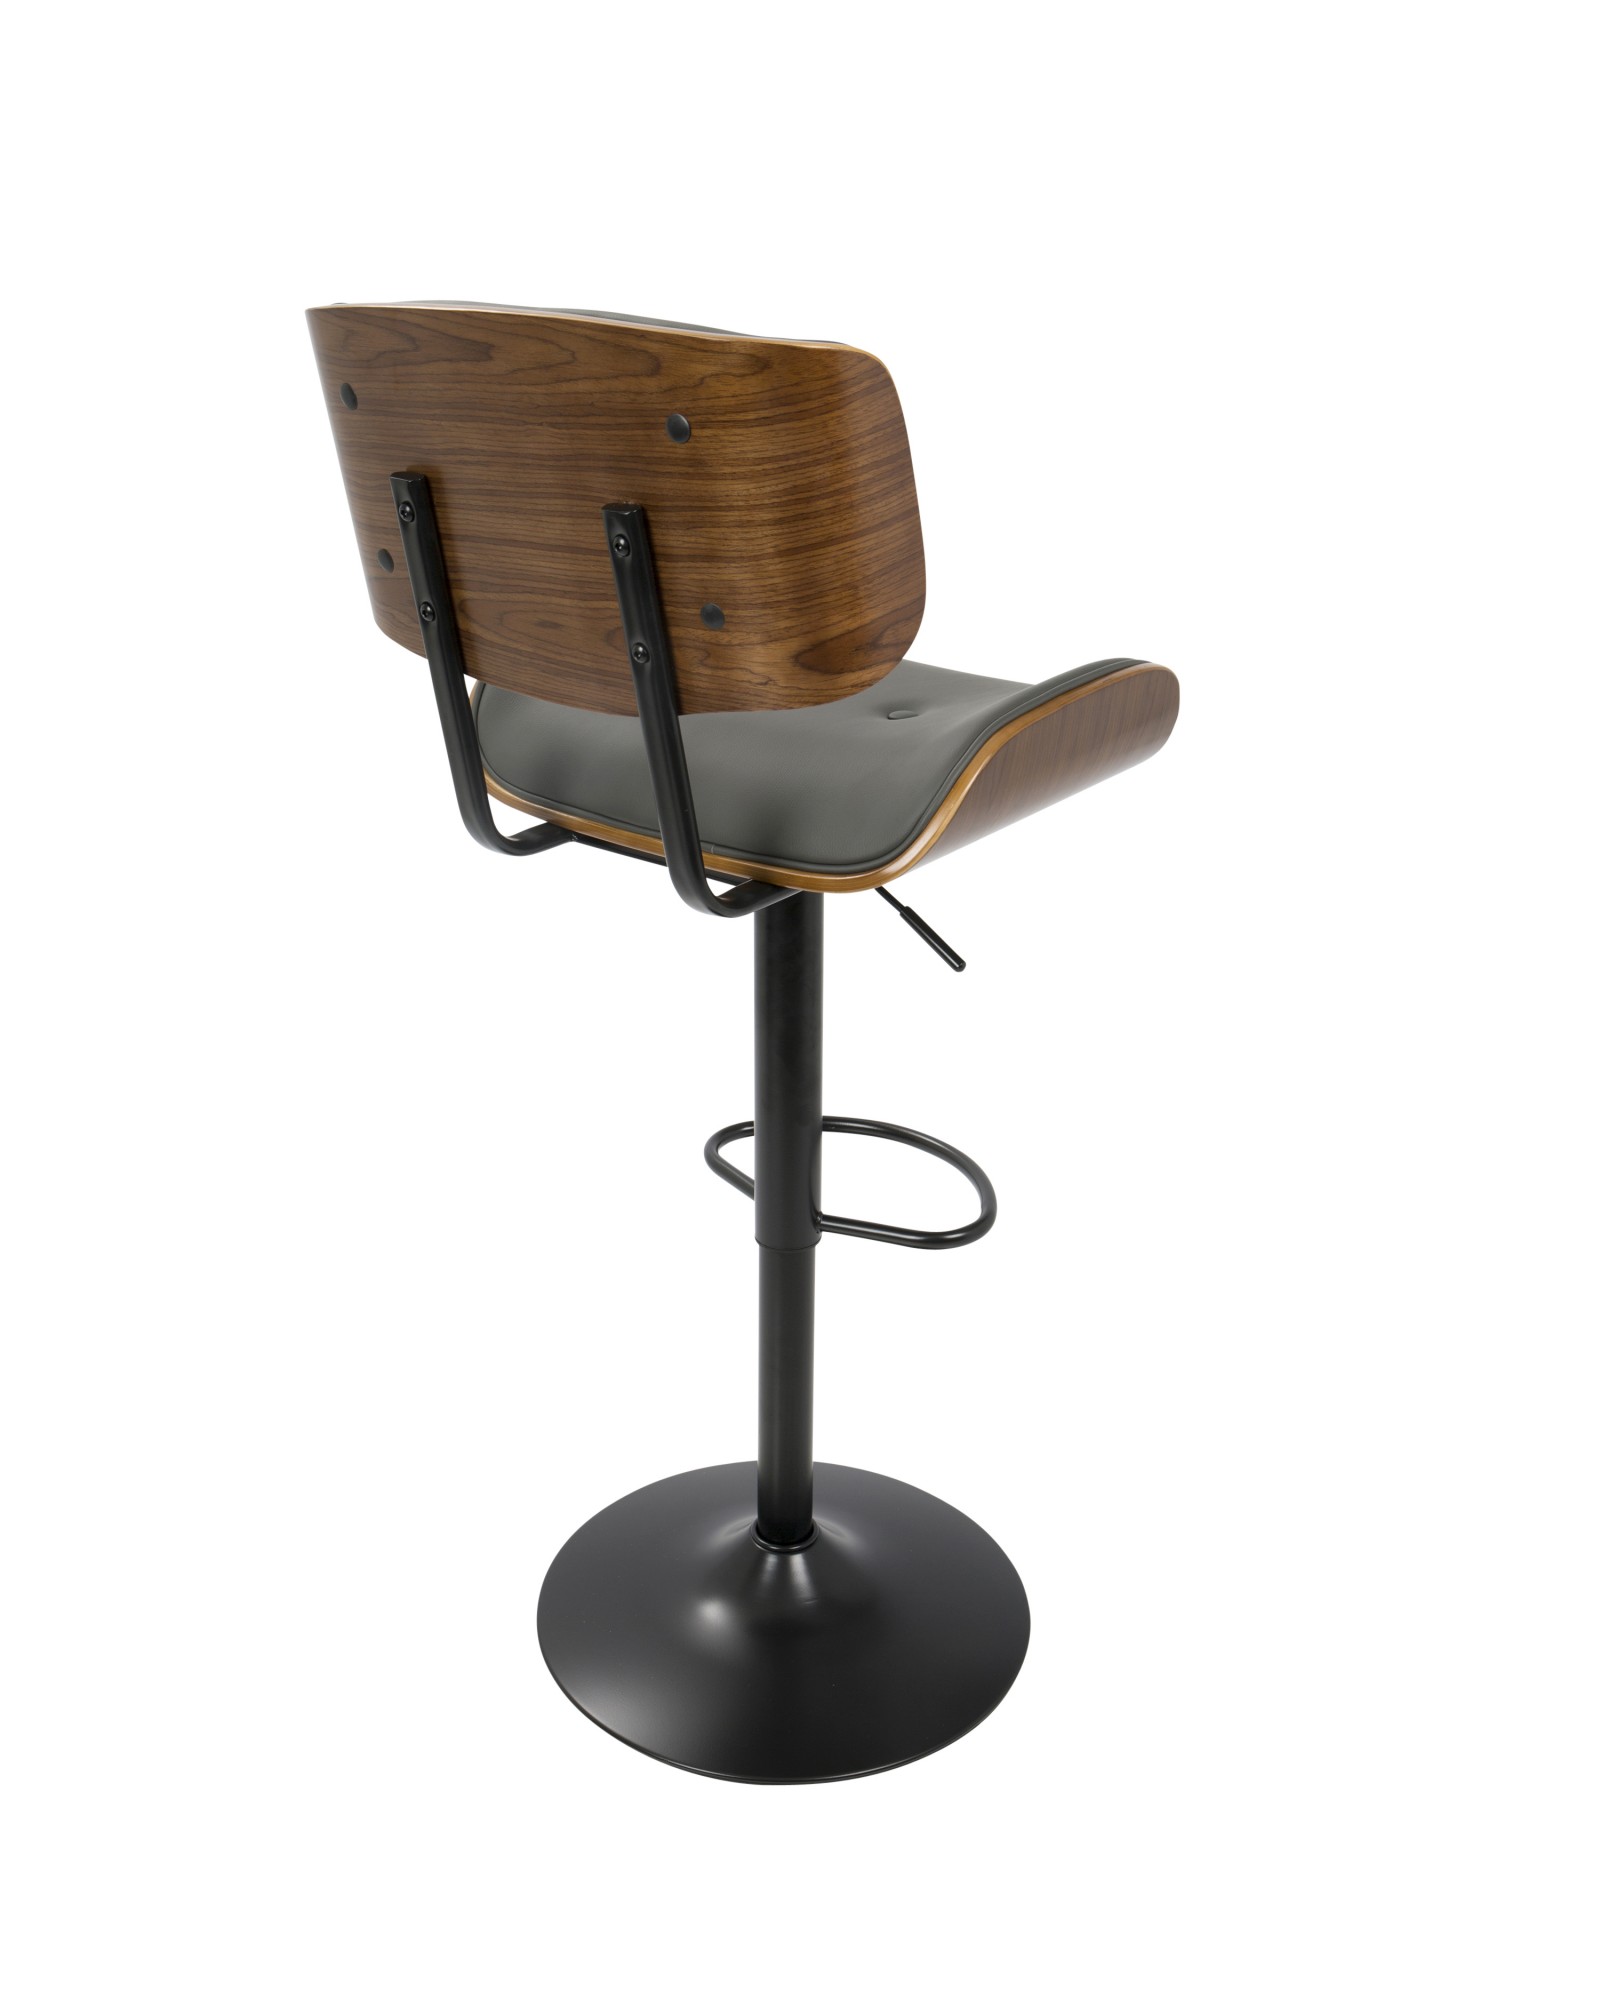 Lombardi Mid-Century Modern Adjustable Barstool in Walnut with Grey Faux Leather